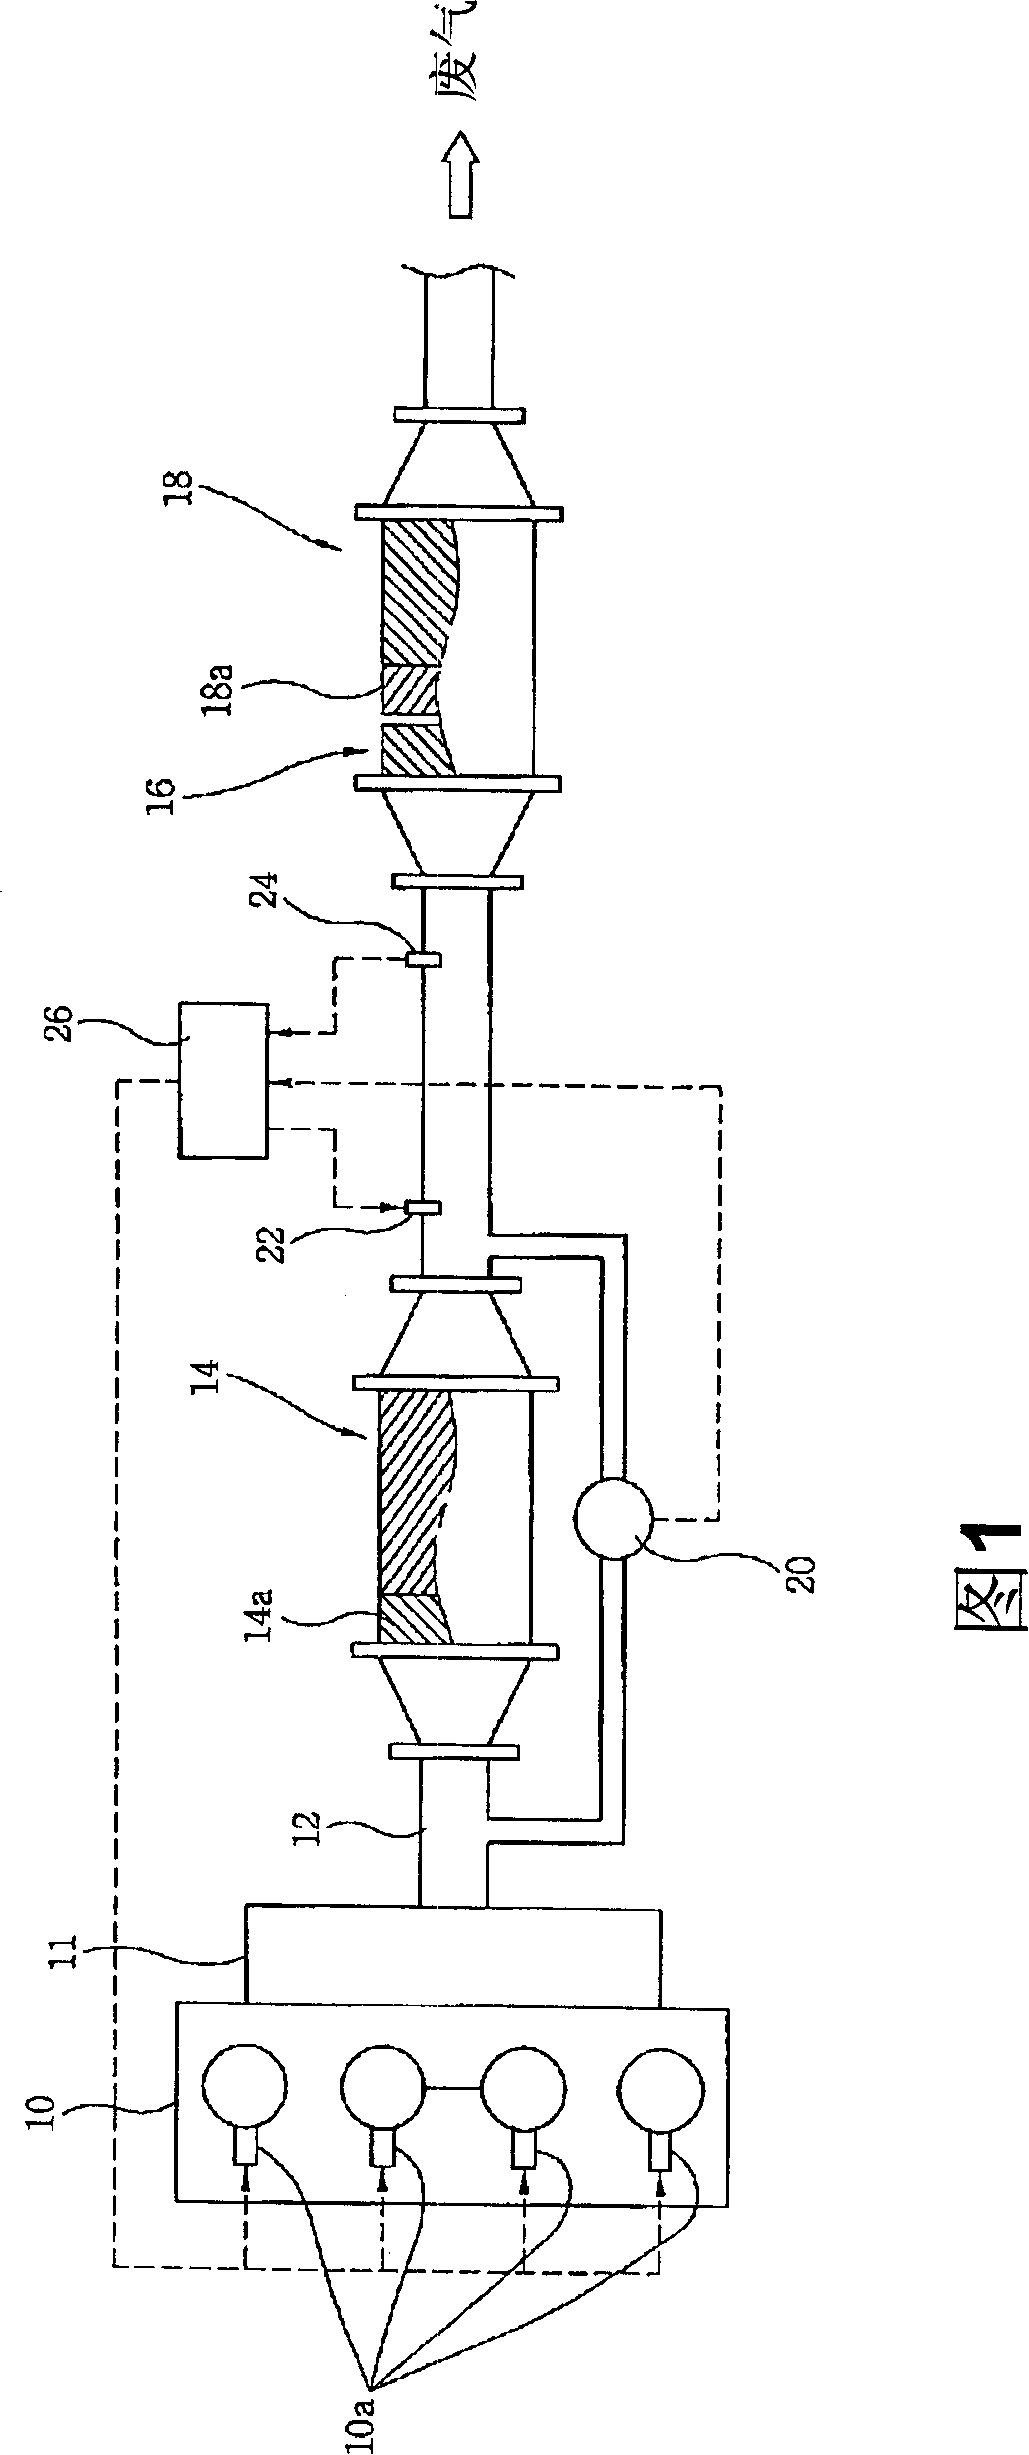 Purification device for decreasing particulate matter and nitrogen oxides in diesel engine